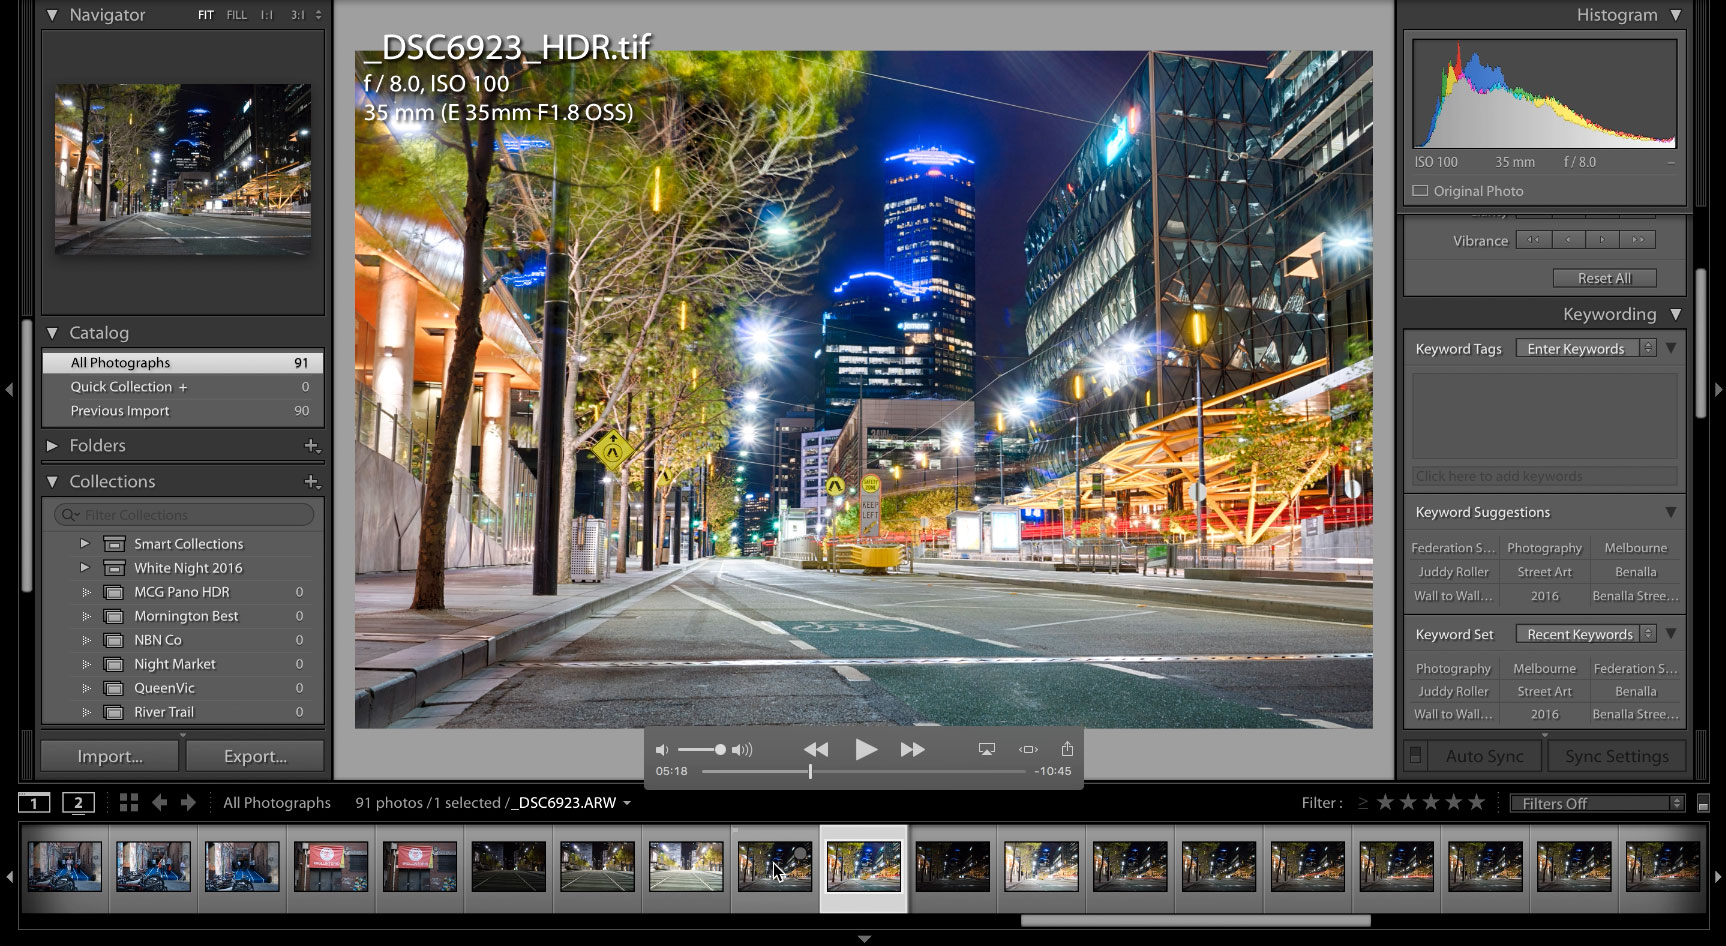 Building an Image - HDR and Light Trails